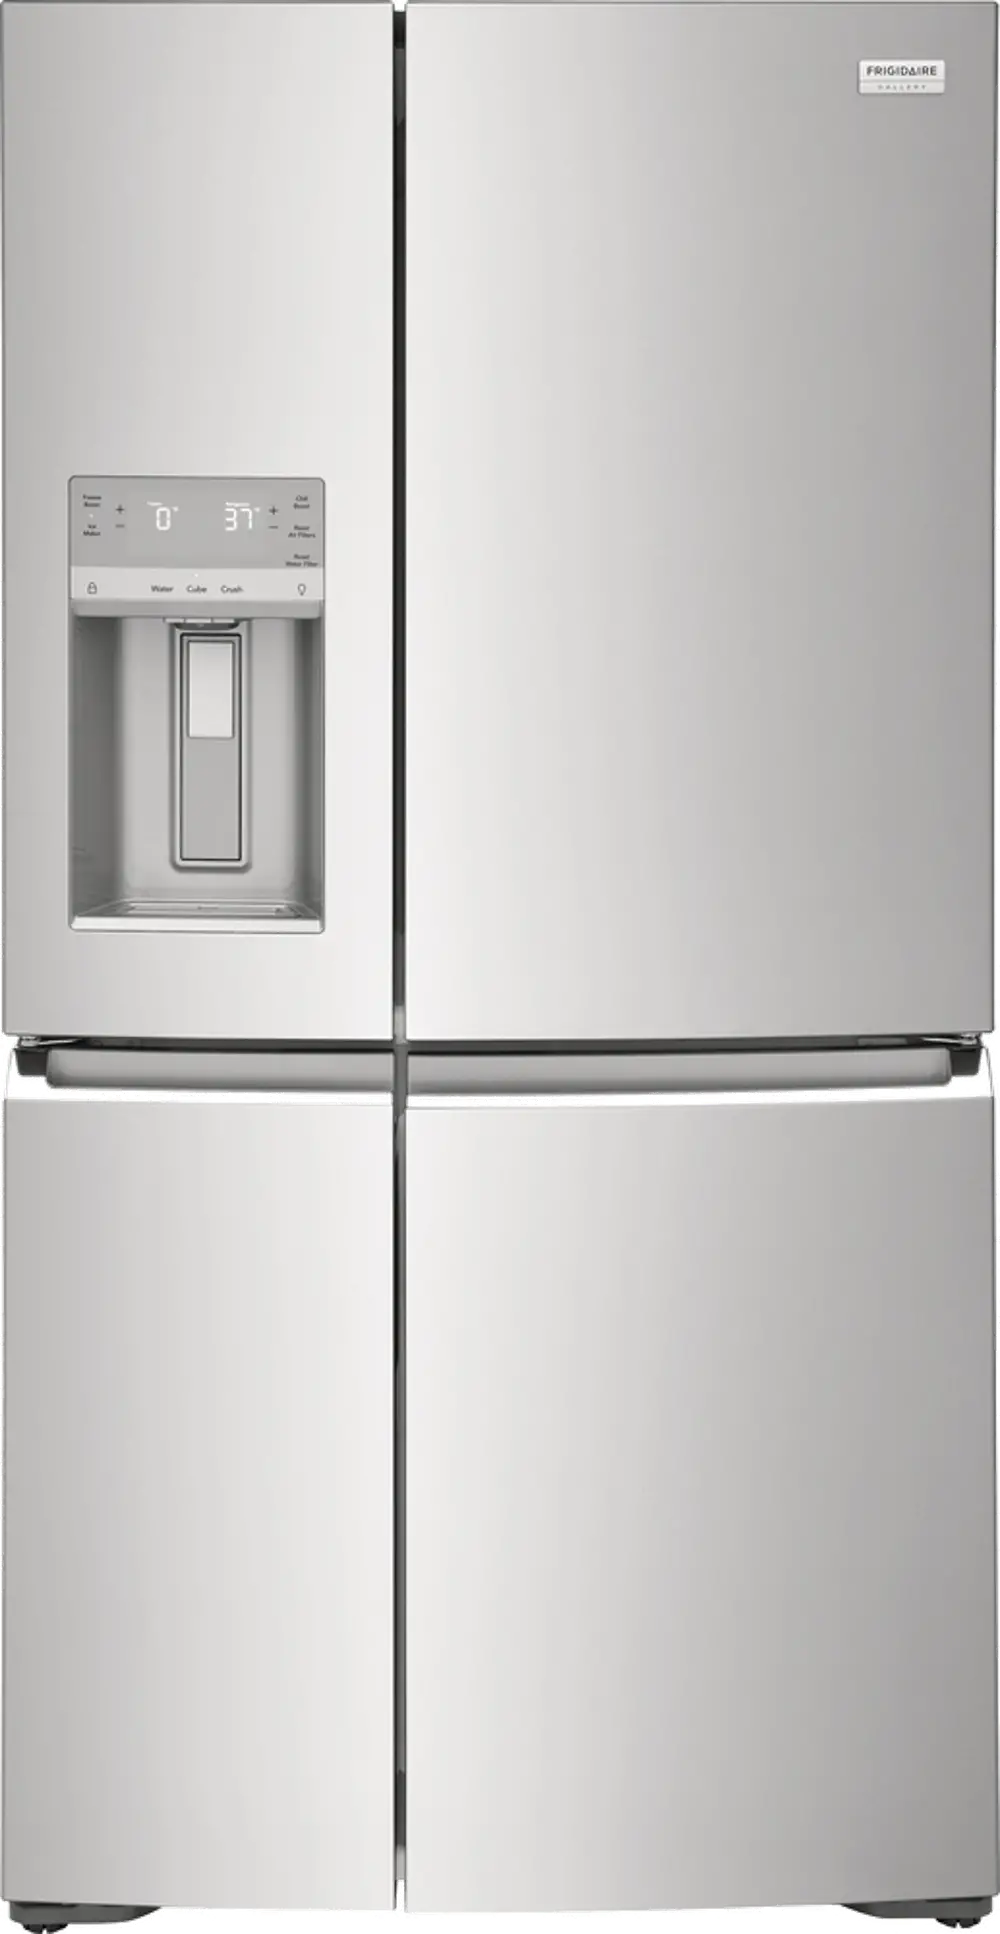 GRQC2255BF Frigidaire 21.3 cu ft French Door Refrigerator - Counter Depth Stainless Steel-1